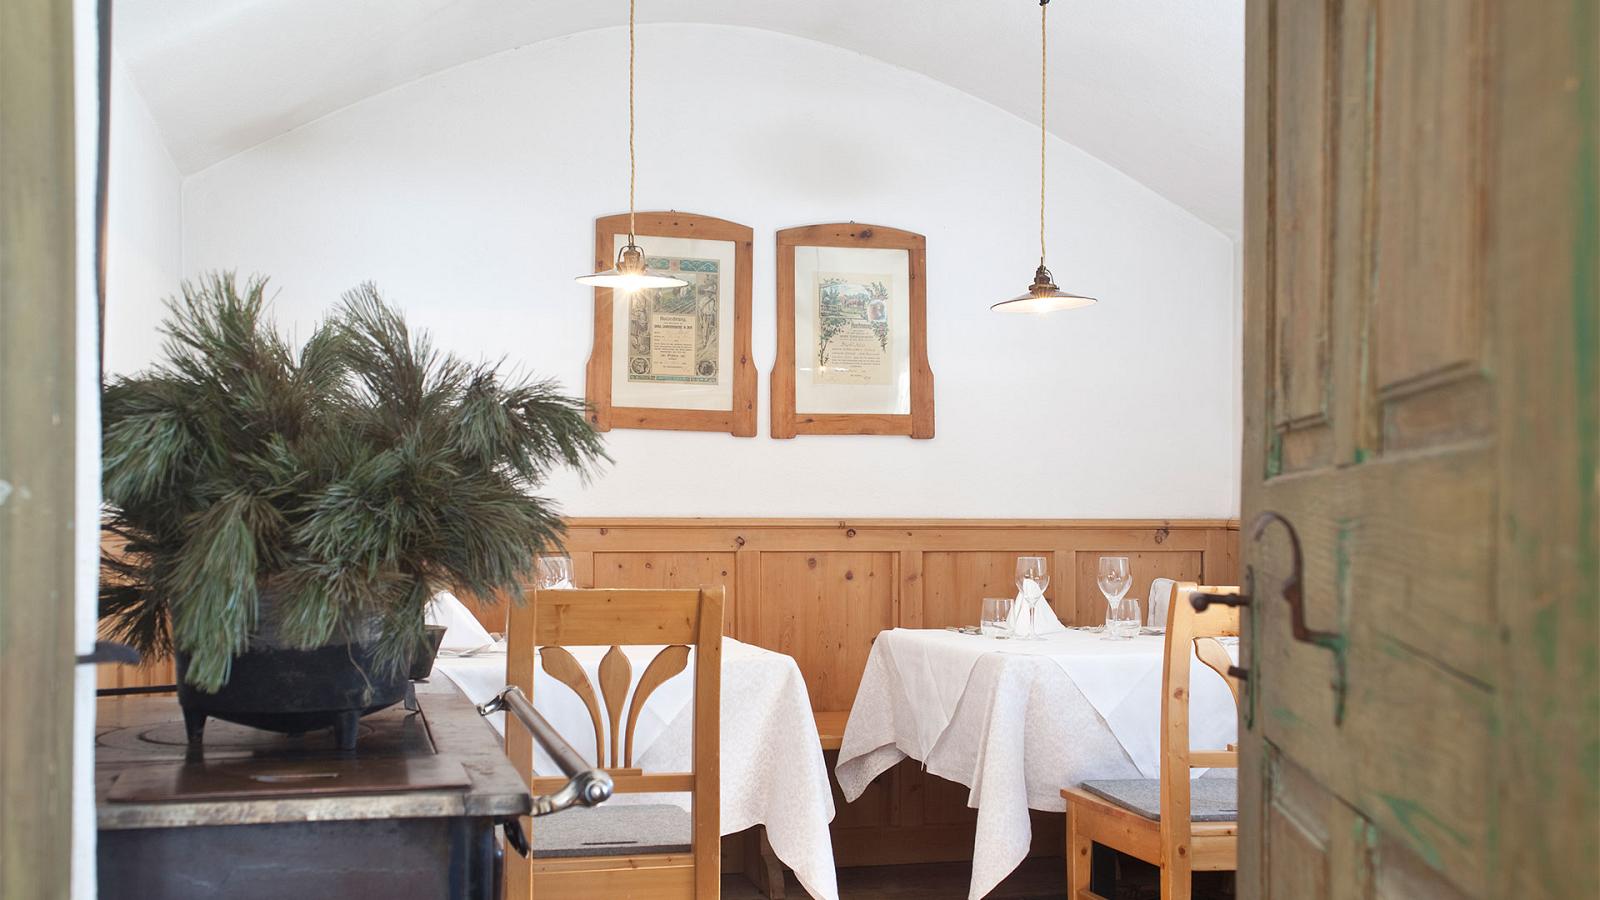 A corner of the dining room of the Hotel Strobl in Sesto with wooden furniture, antique paintings, mugo pine branches above a wood stove and two elegantly decorated tables